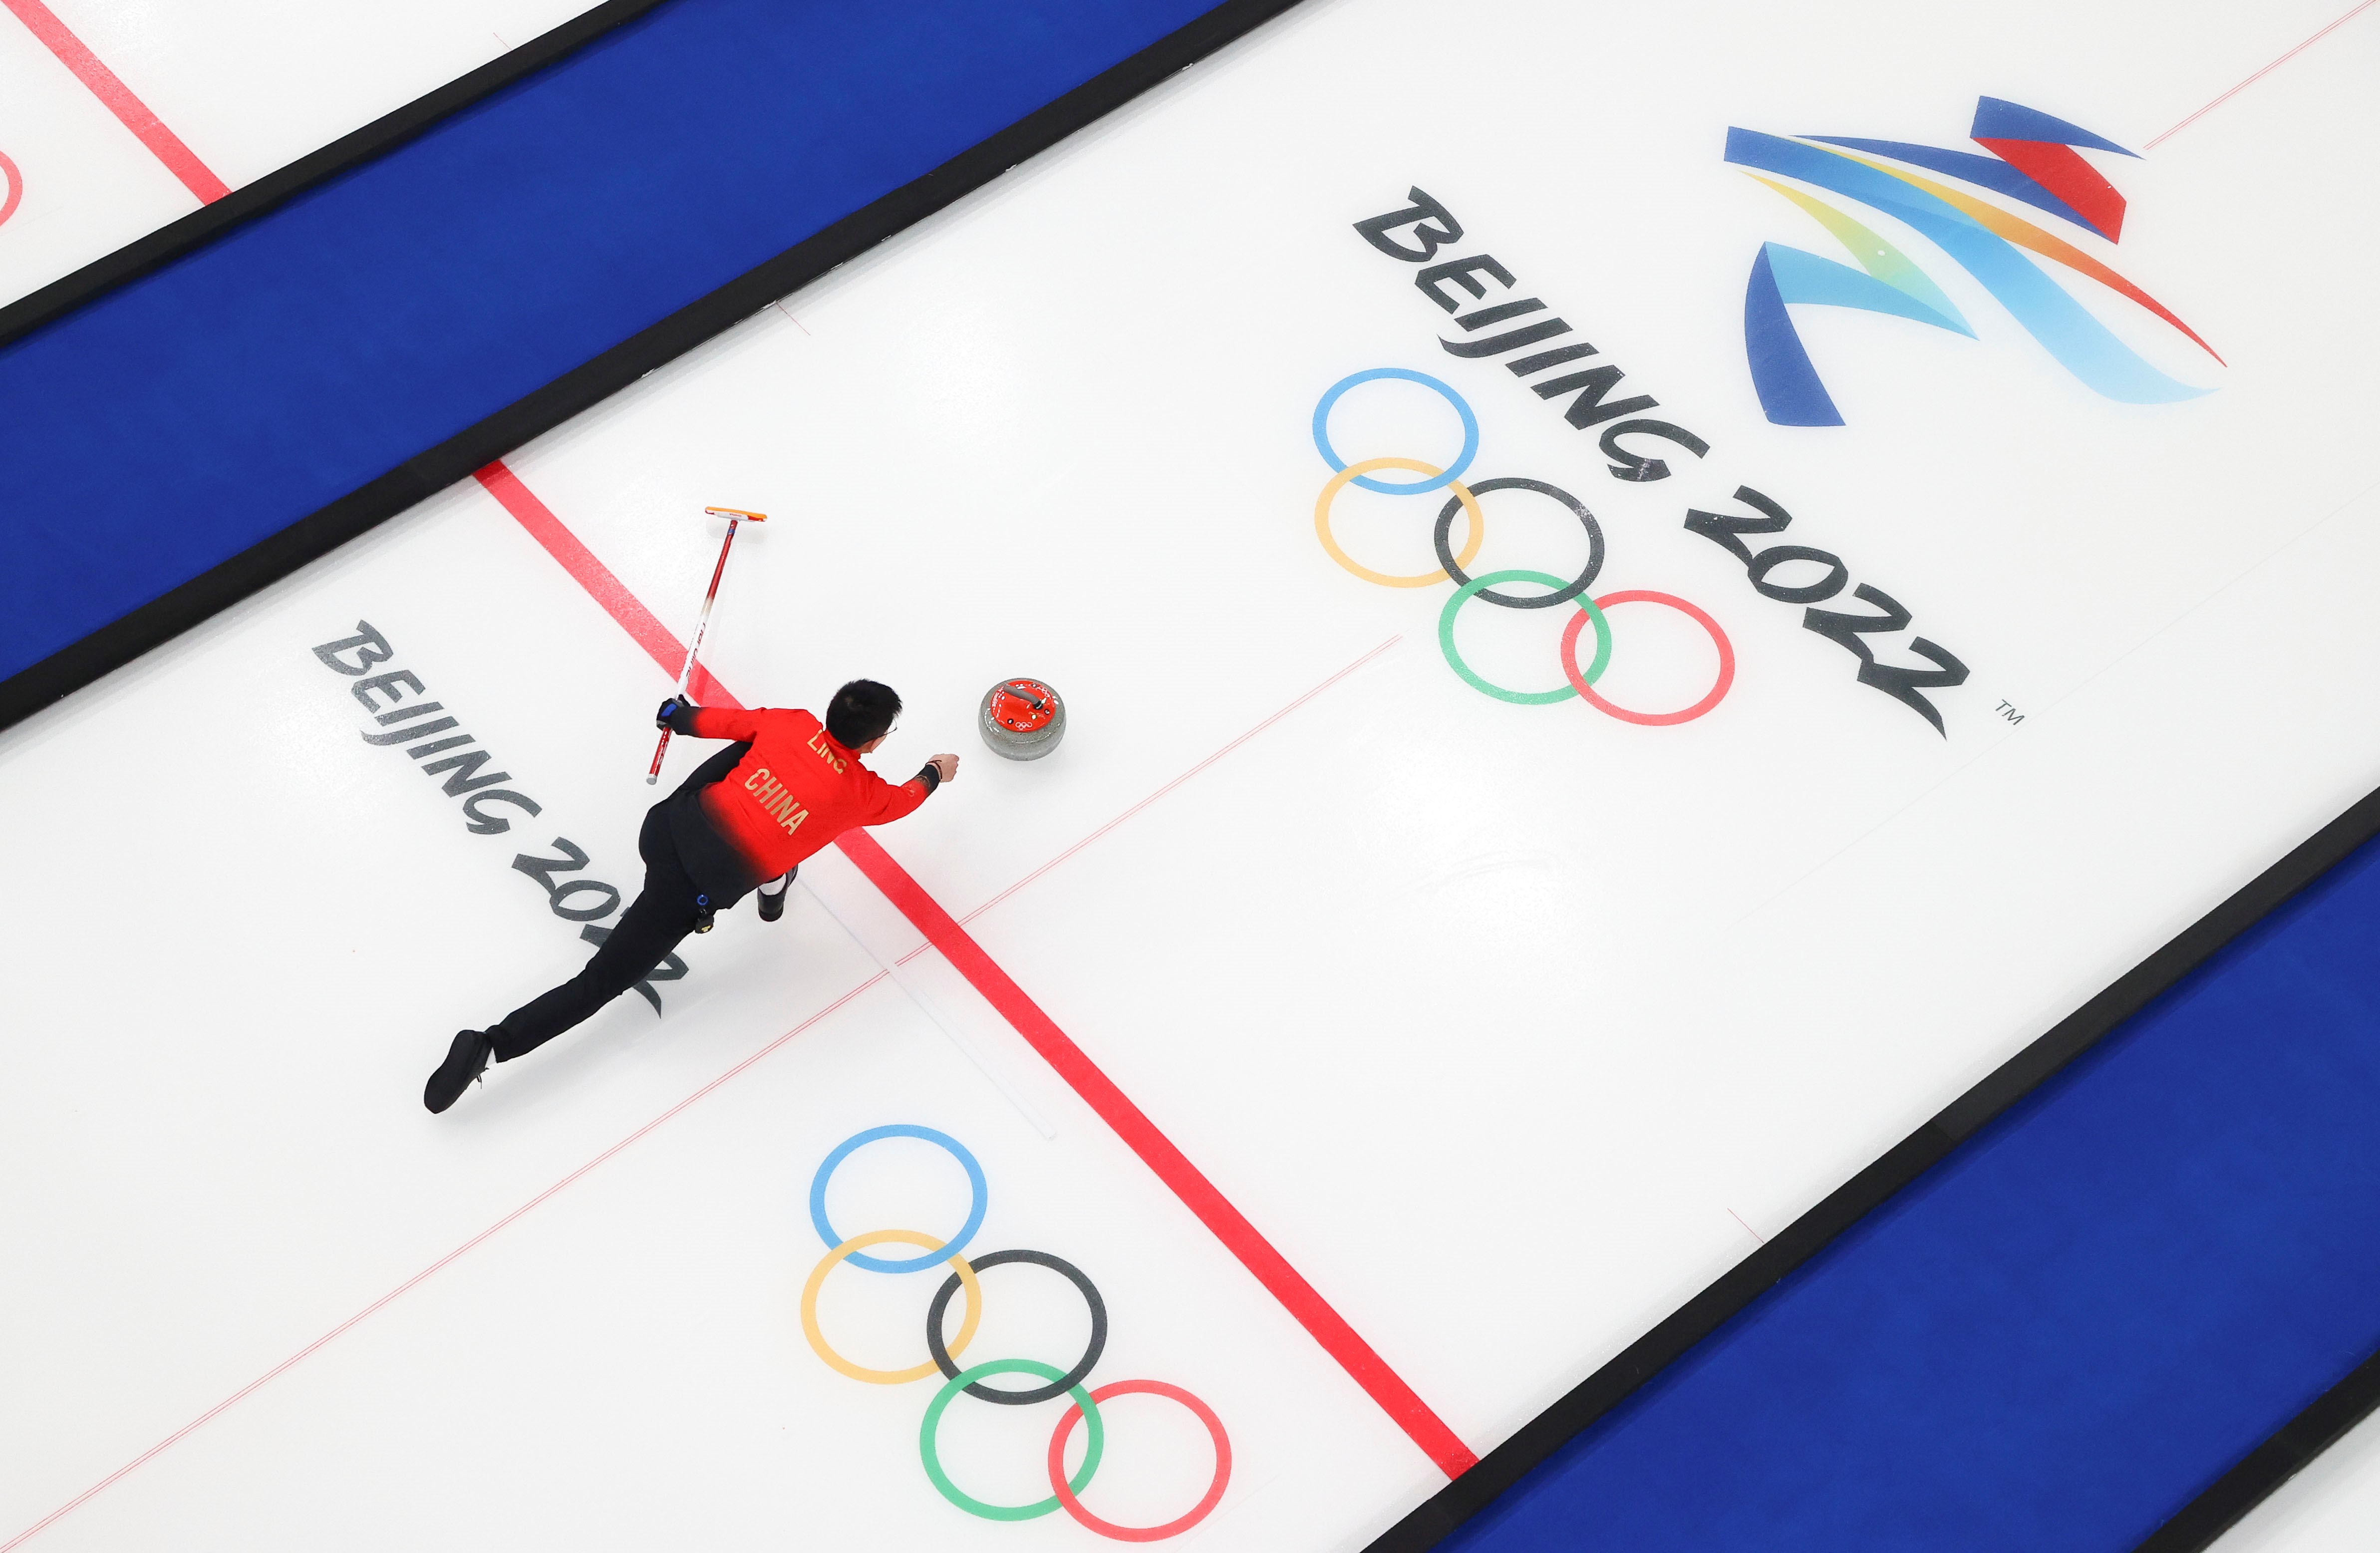 China's Ling Zhi competes during the curling mixed doubles round robin event of the Beijing 2022 Winter Olympics between China and Sweden at National Aquatics Centre.